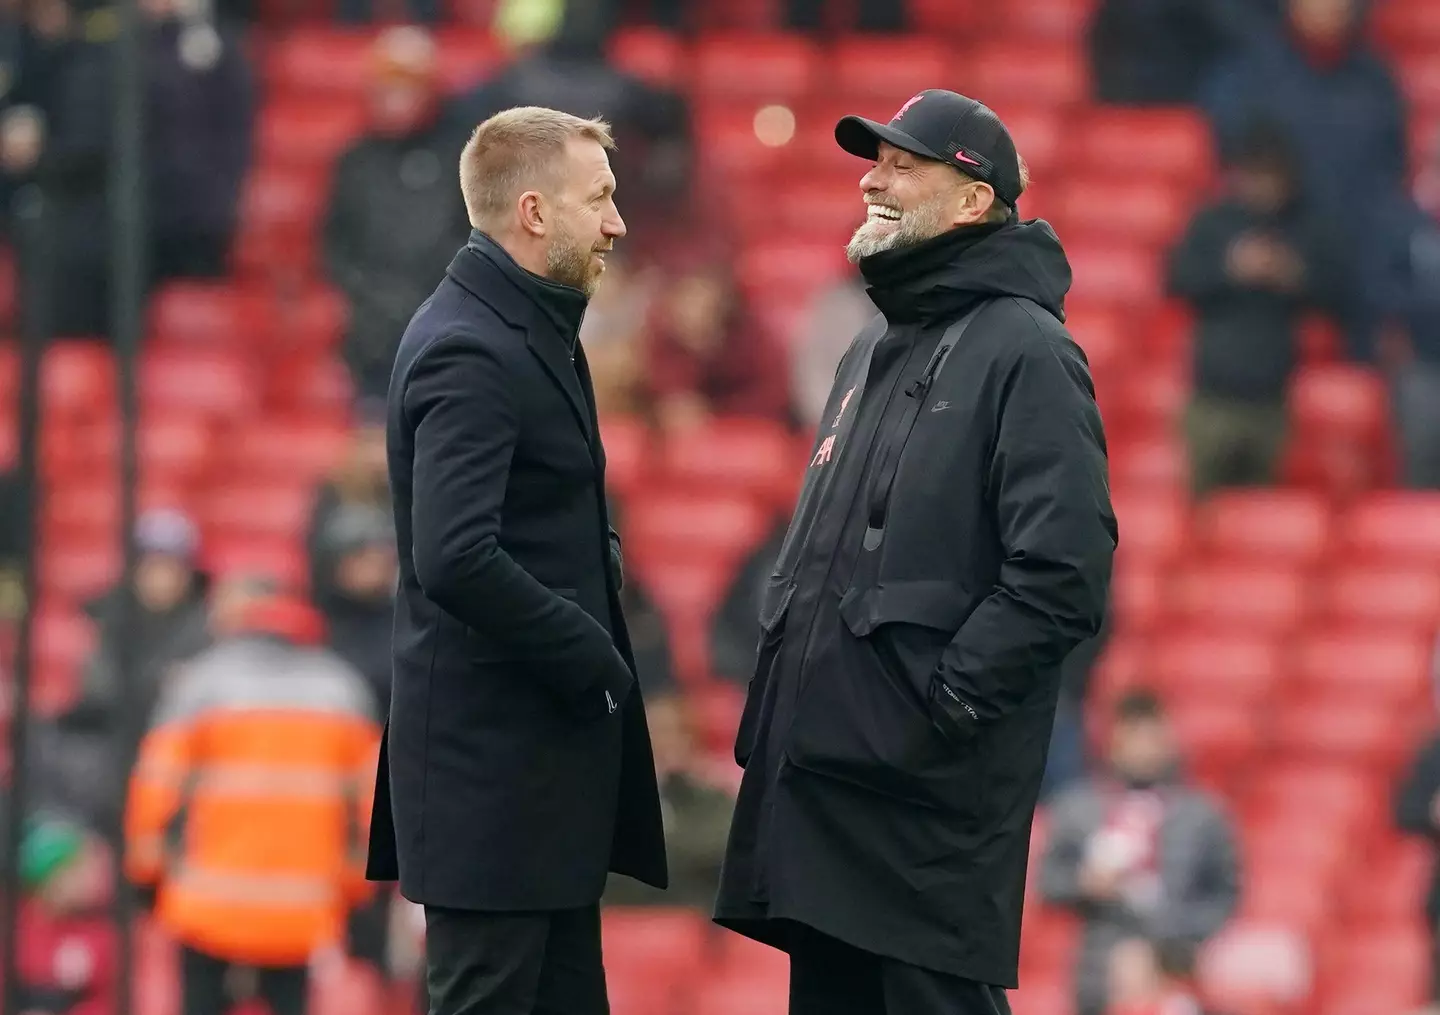 Klopp in conversation with Chelsea manager Graham Potter. (Image